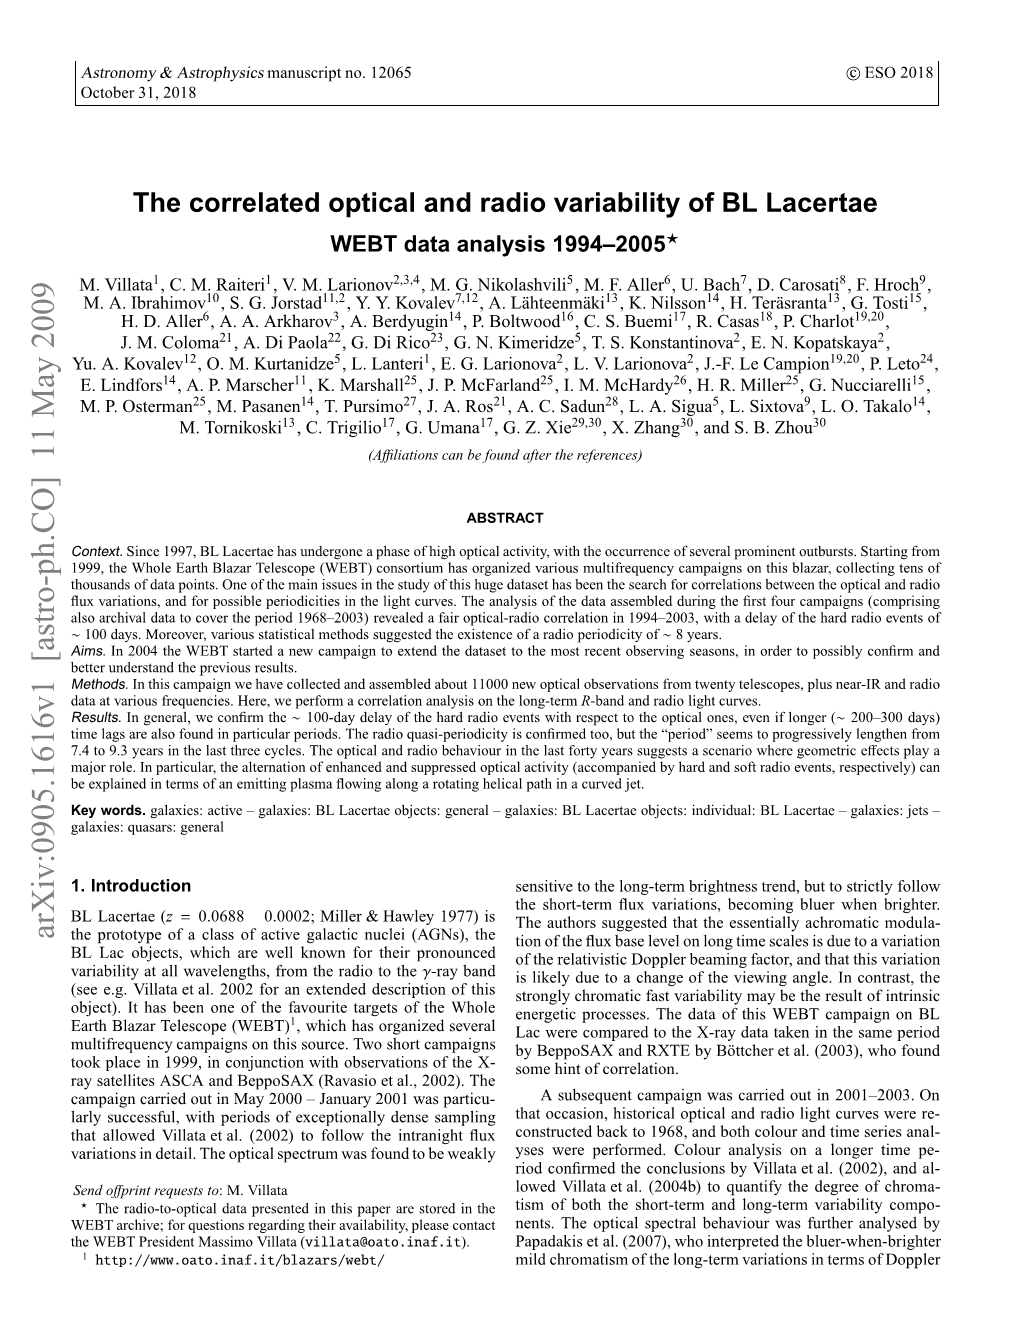 The Correlated Optical and Radio Variability of BL Lacertae. WEBT